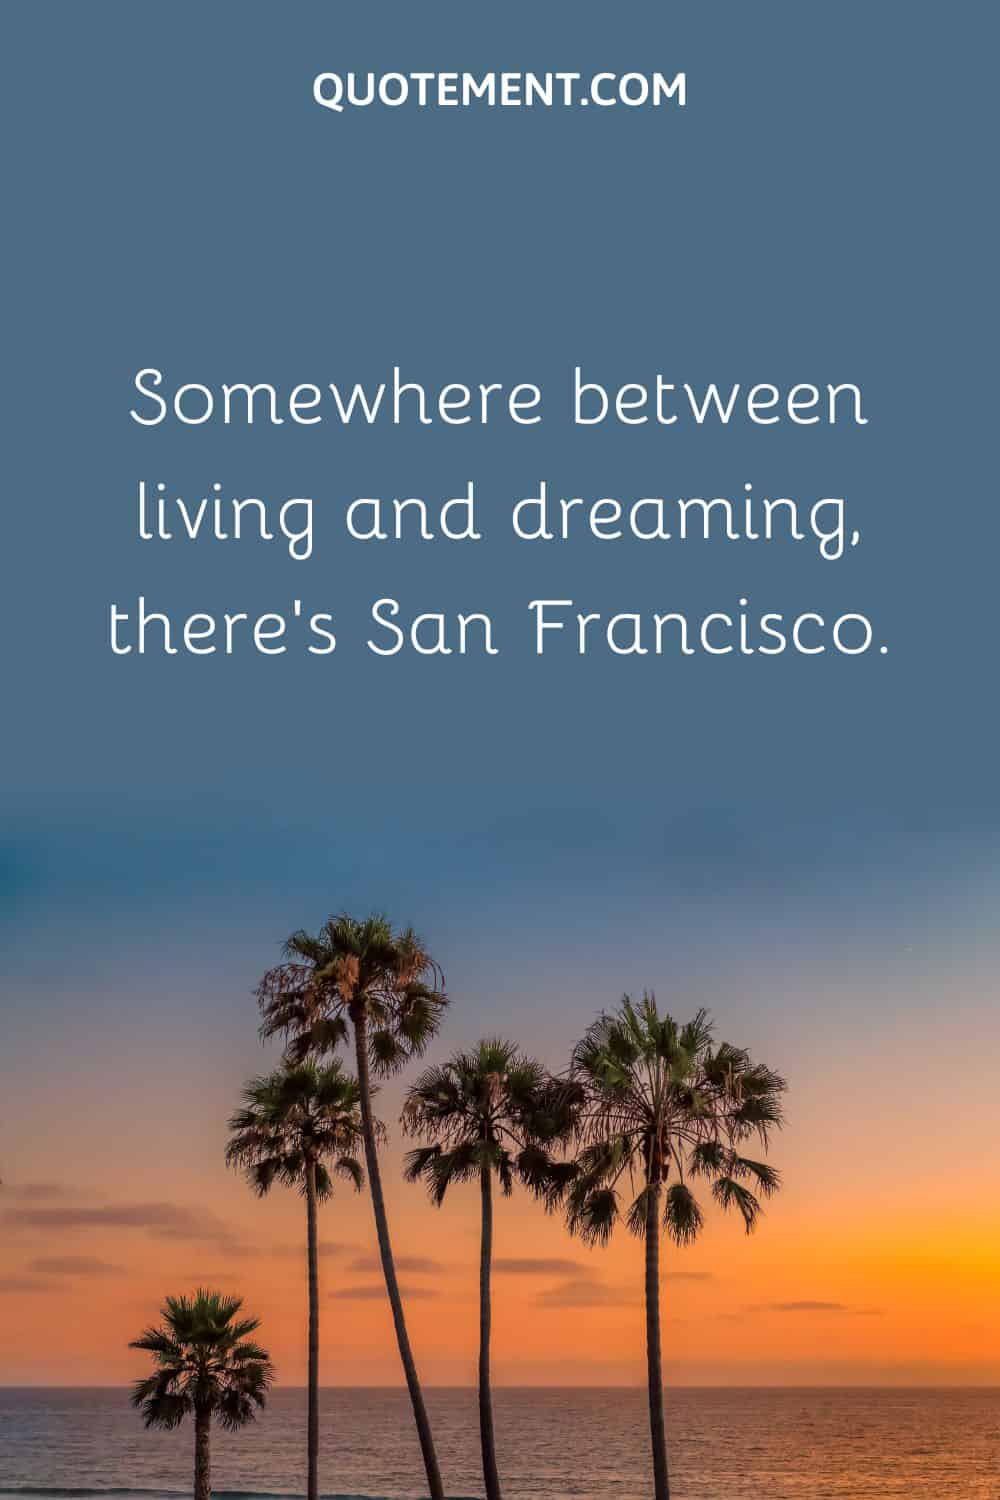 Somewhere between living and dreaming, there’s San Francisco